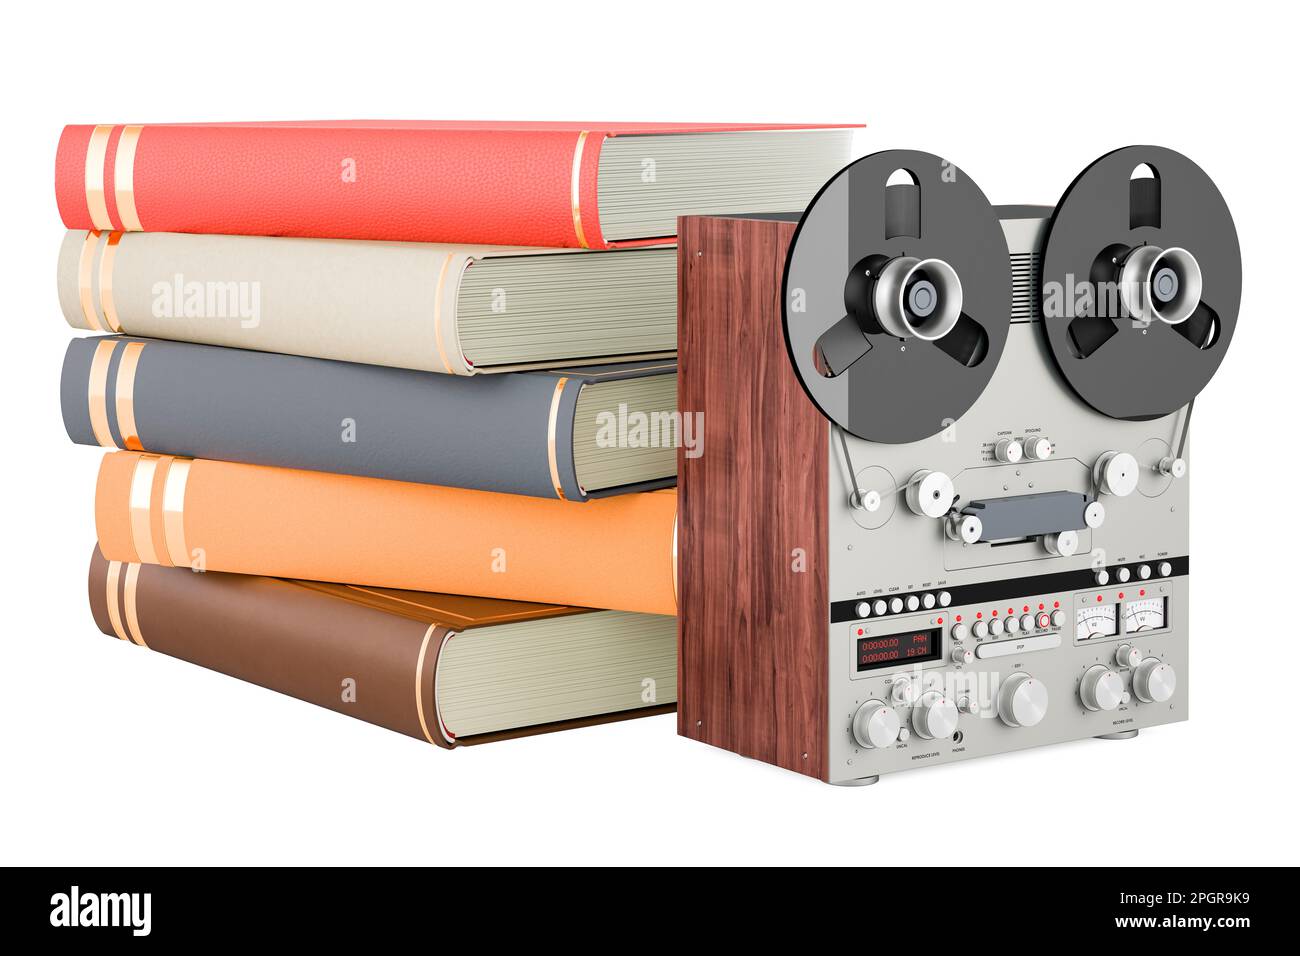 Reel-to-reel tape recorder with books, 3D rendering isolated on white background Stock Photo